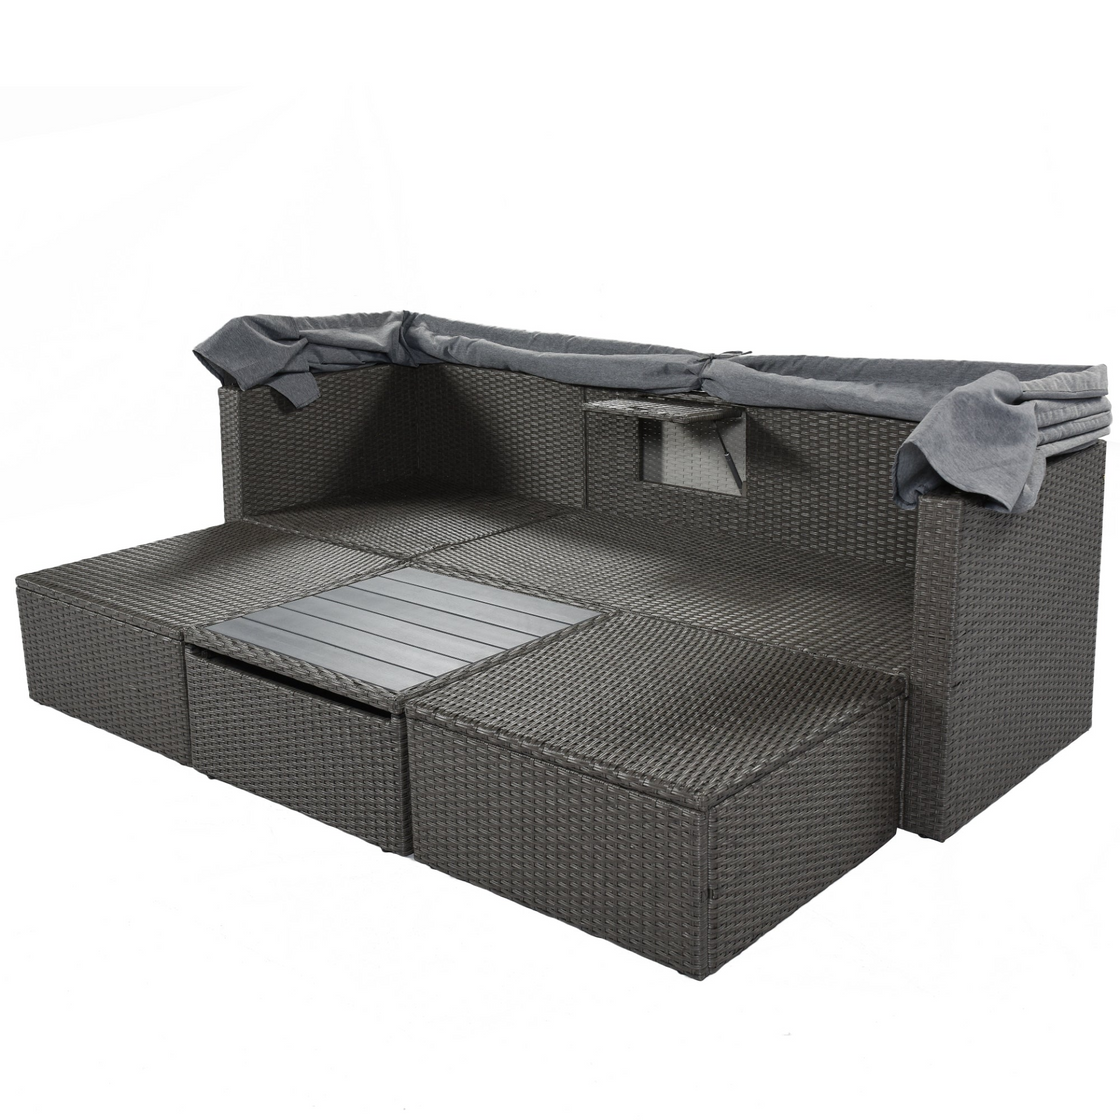 Outdoor Patio Rectangle Daybed with Retractable Canopy - Wicker Furniture Sectional Seating with Washable Cushions for Backyard and Porch